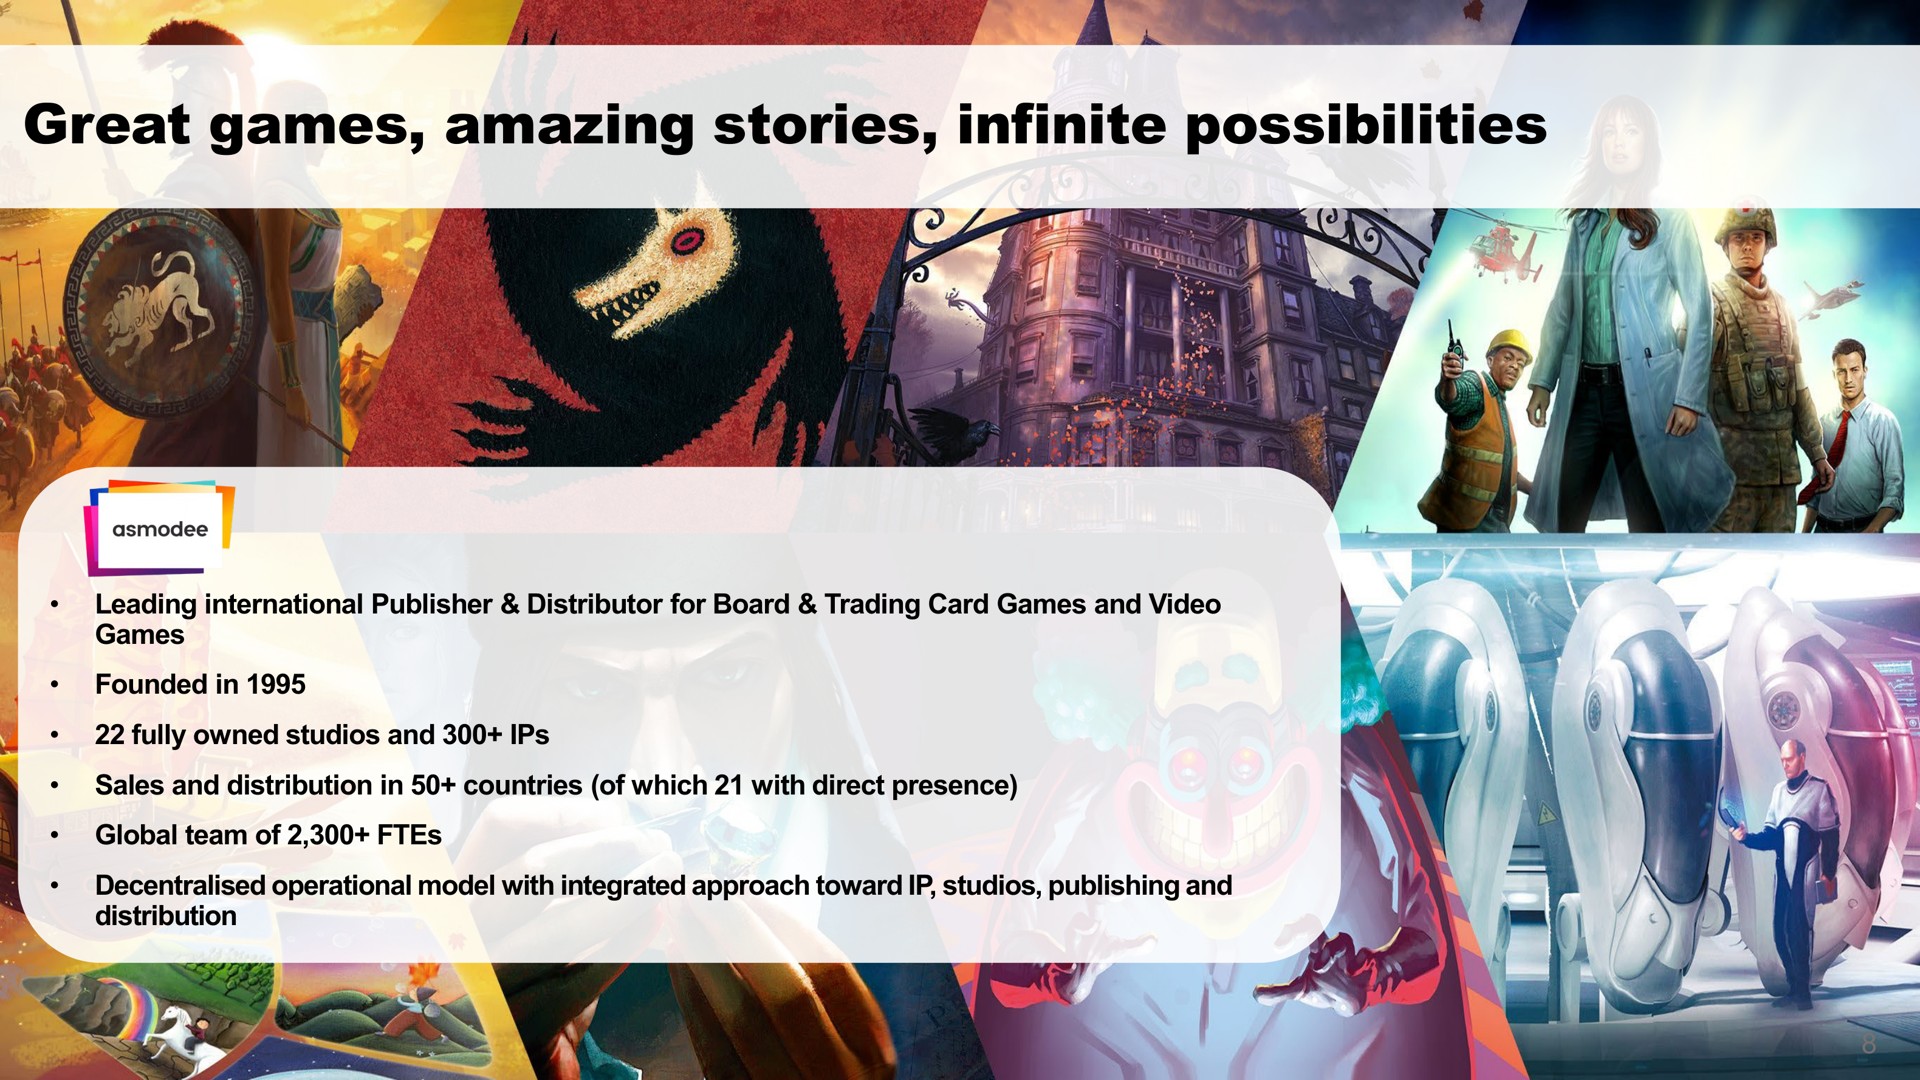 great games amazing stories infinite possibilities | Embracer Group